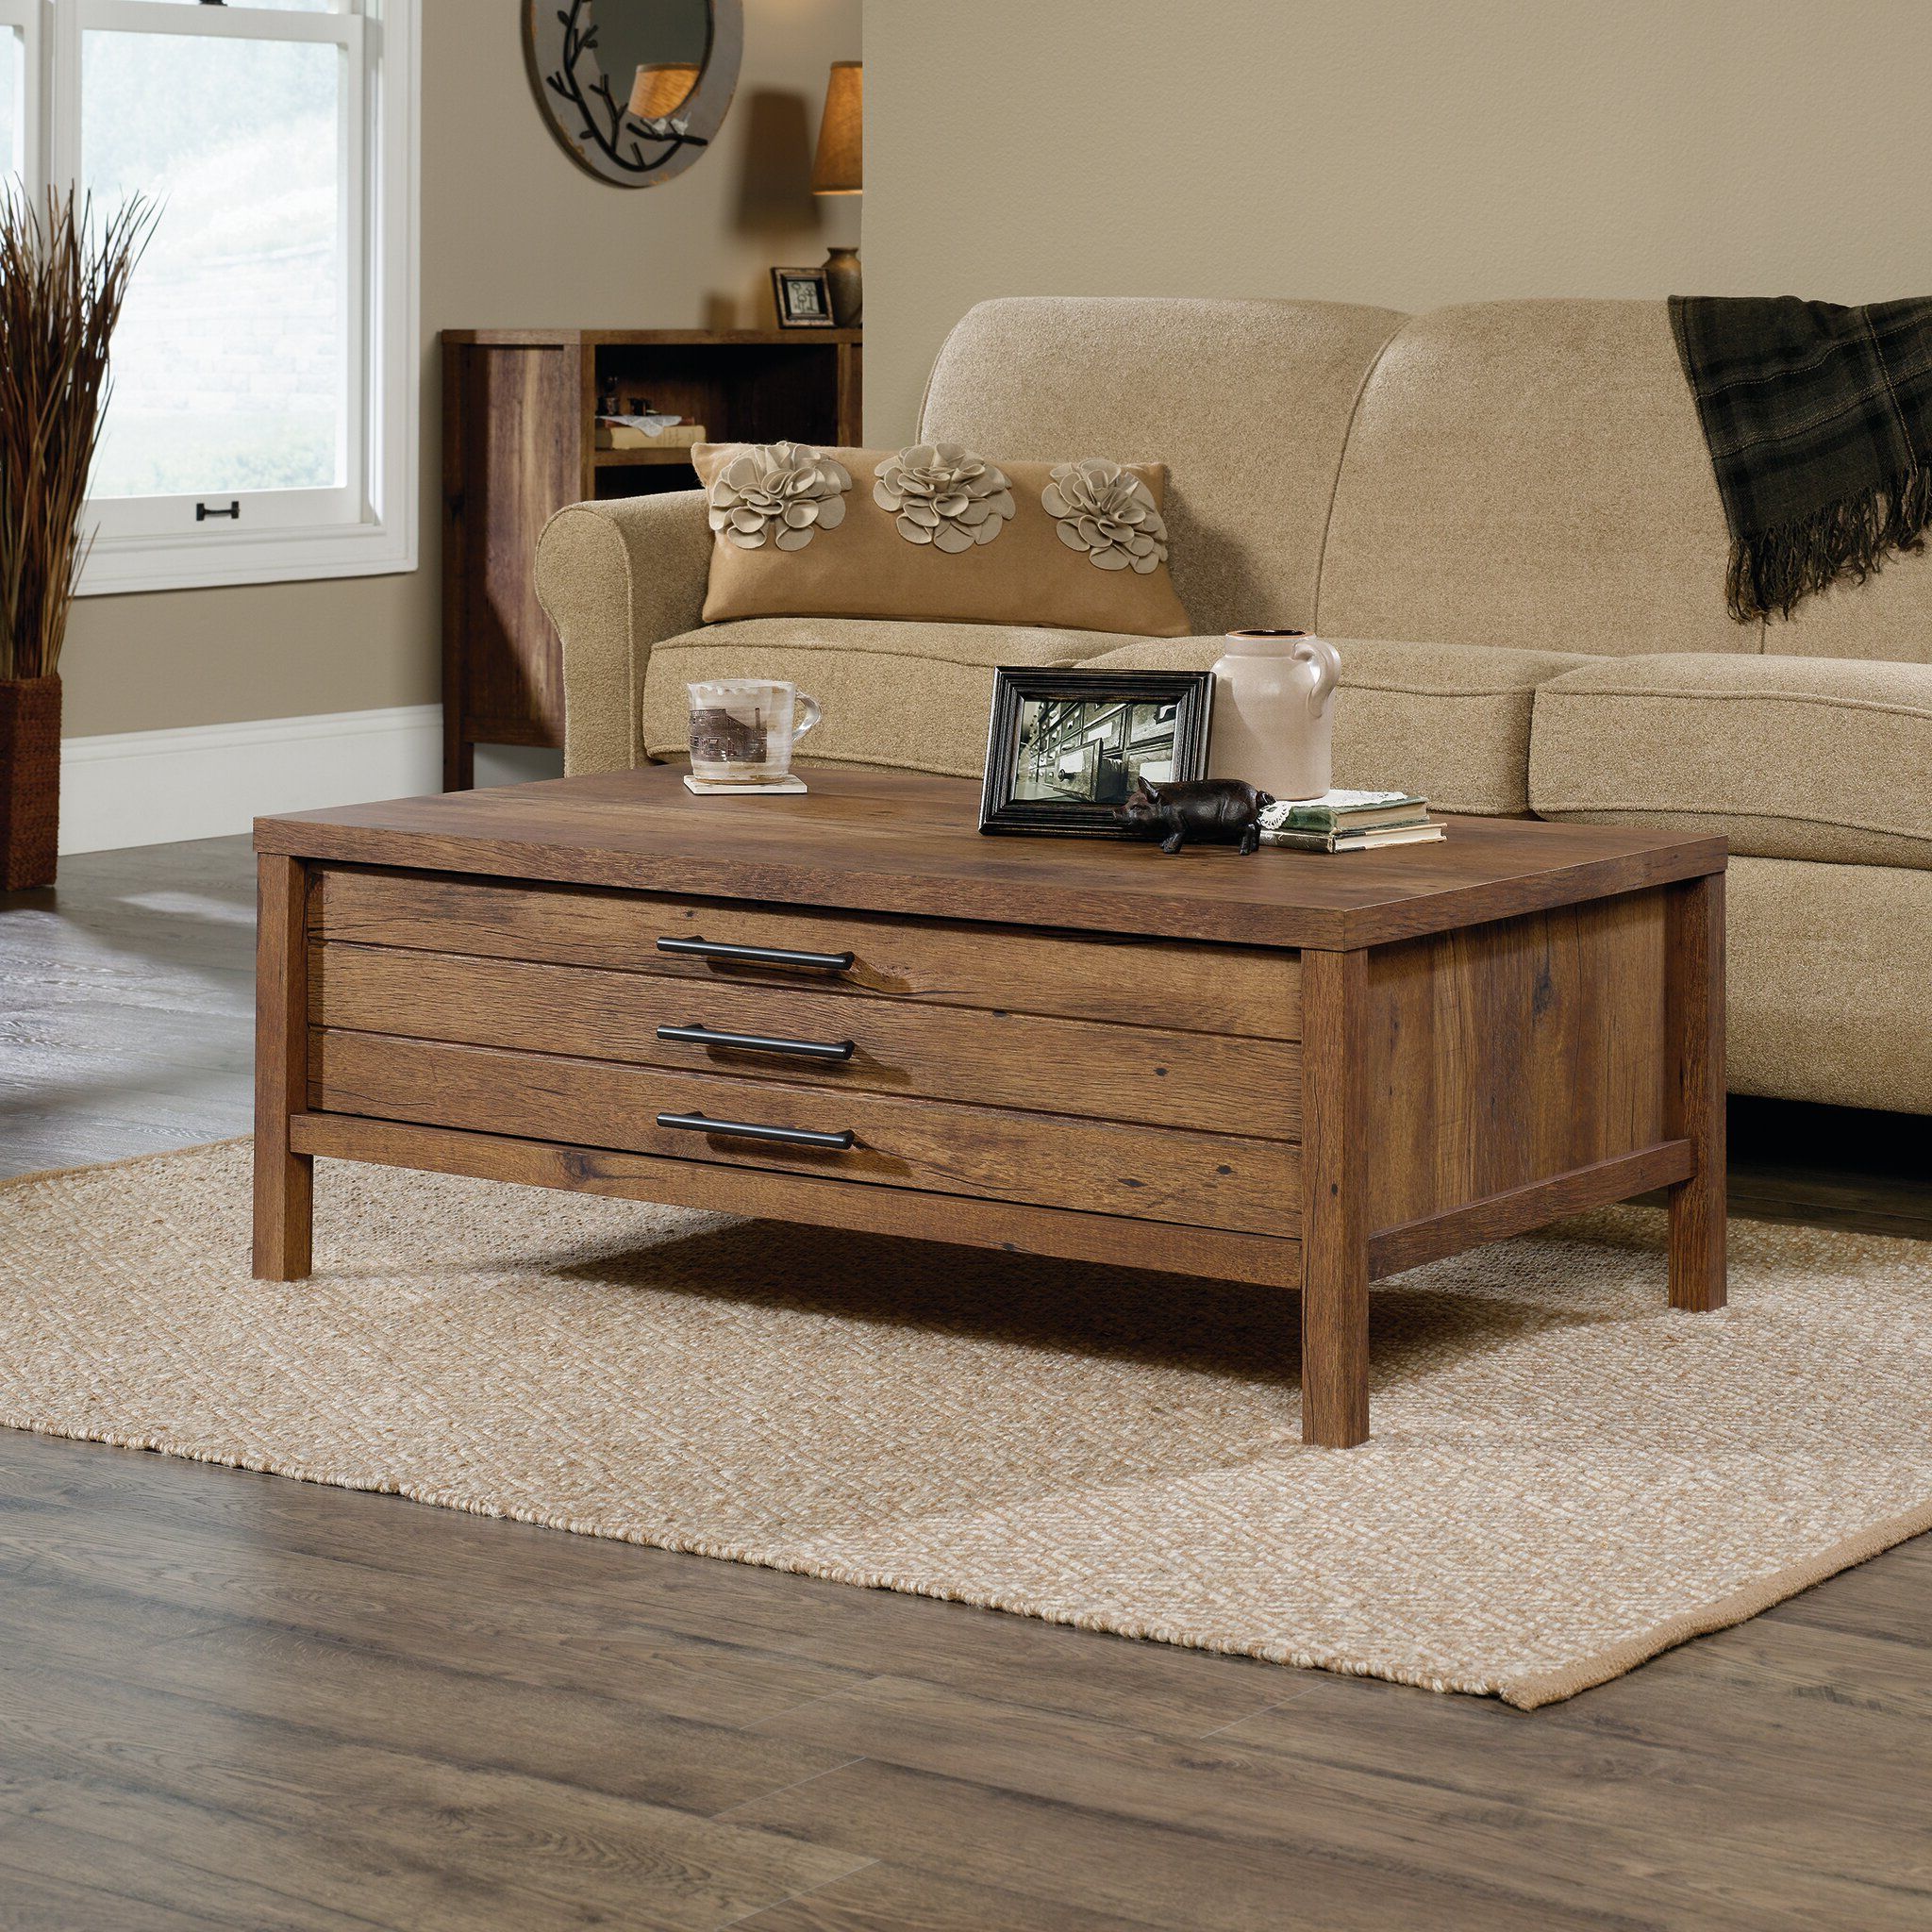 Wayfair With Regard To Widely Used Modern Farmhouse Coffee Table Sets (View 10 of 15)